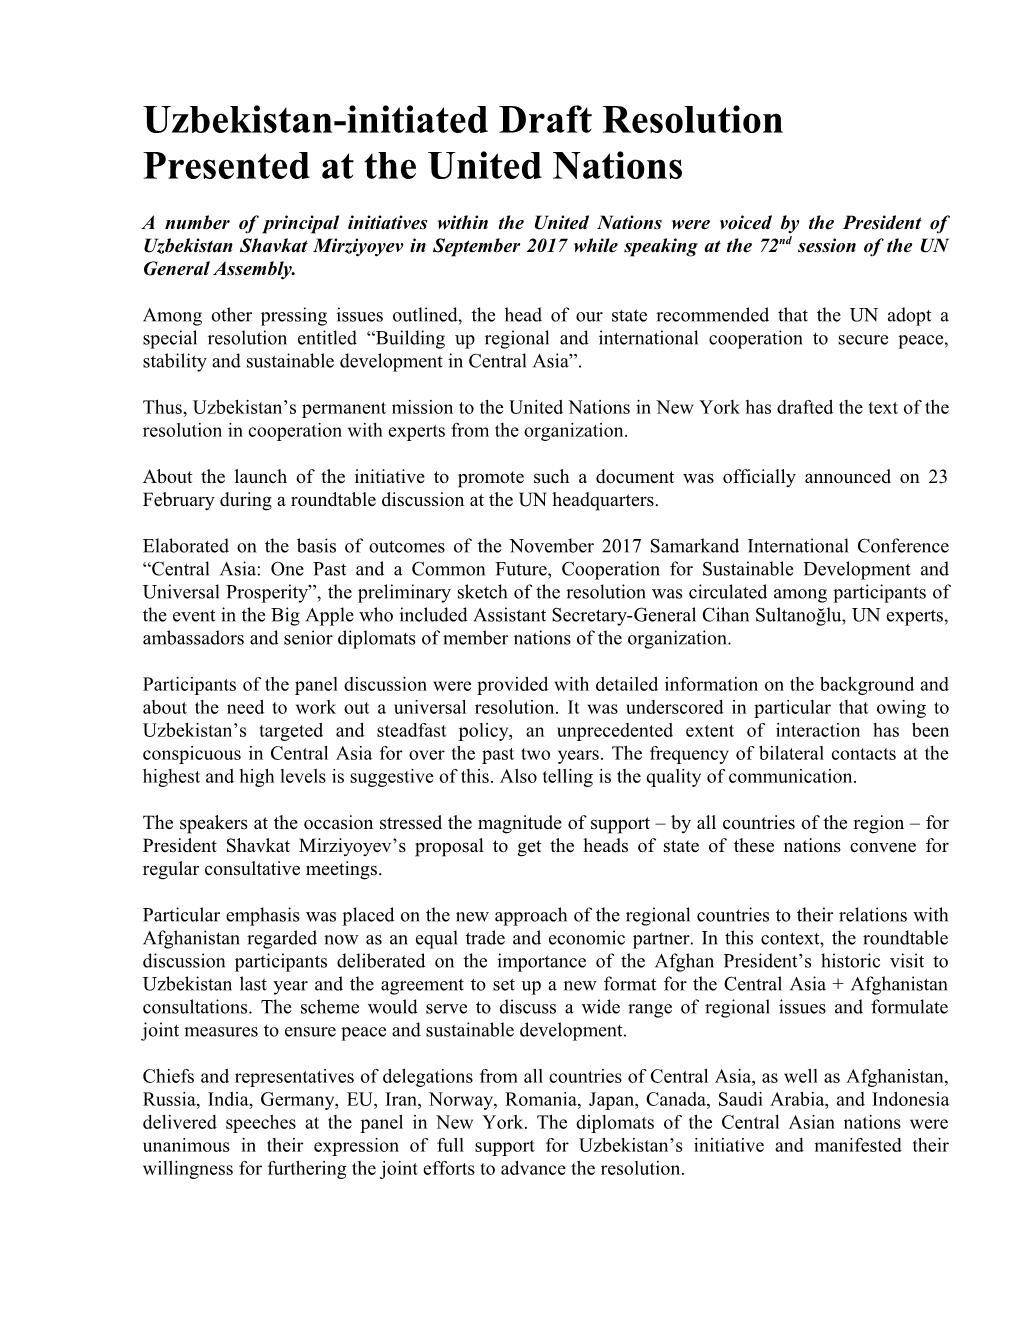 Uzbekistan-Initiated Draft Resolution Presented at the United Nations